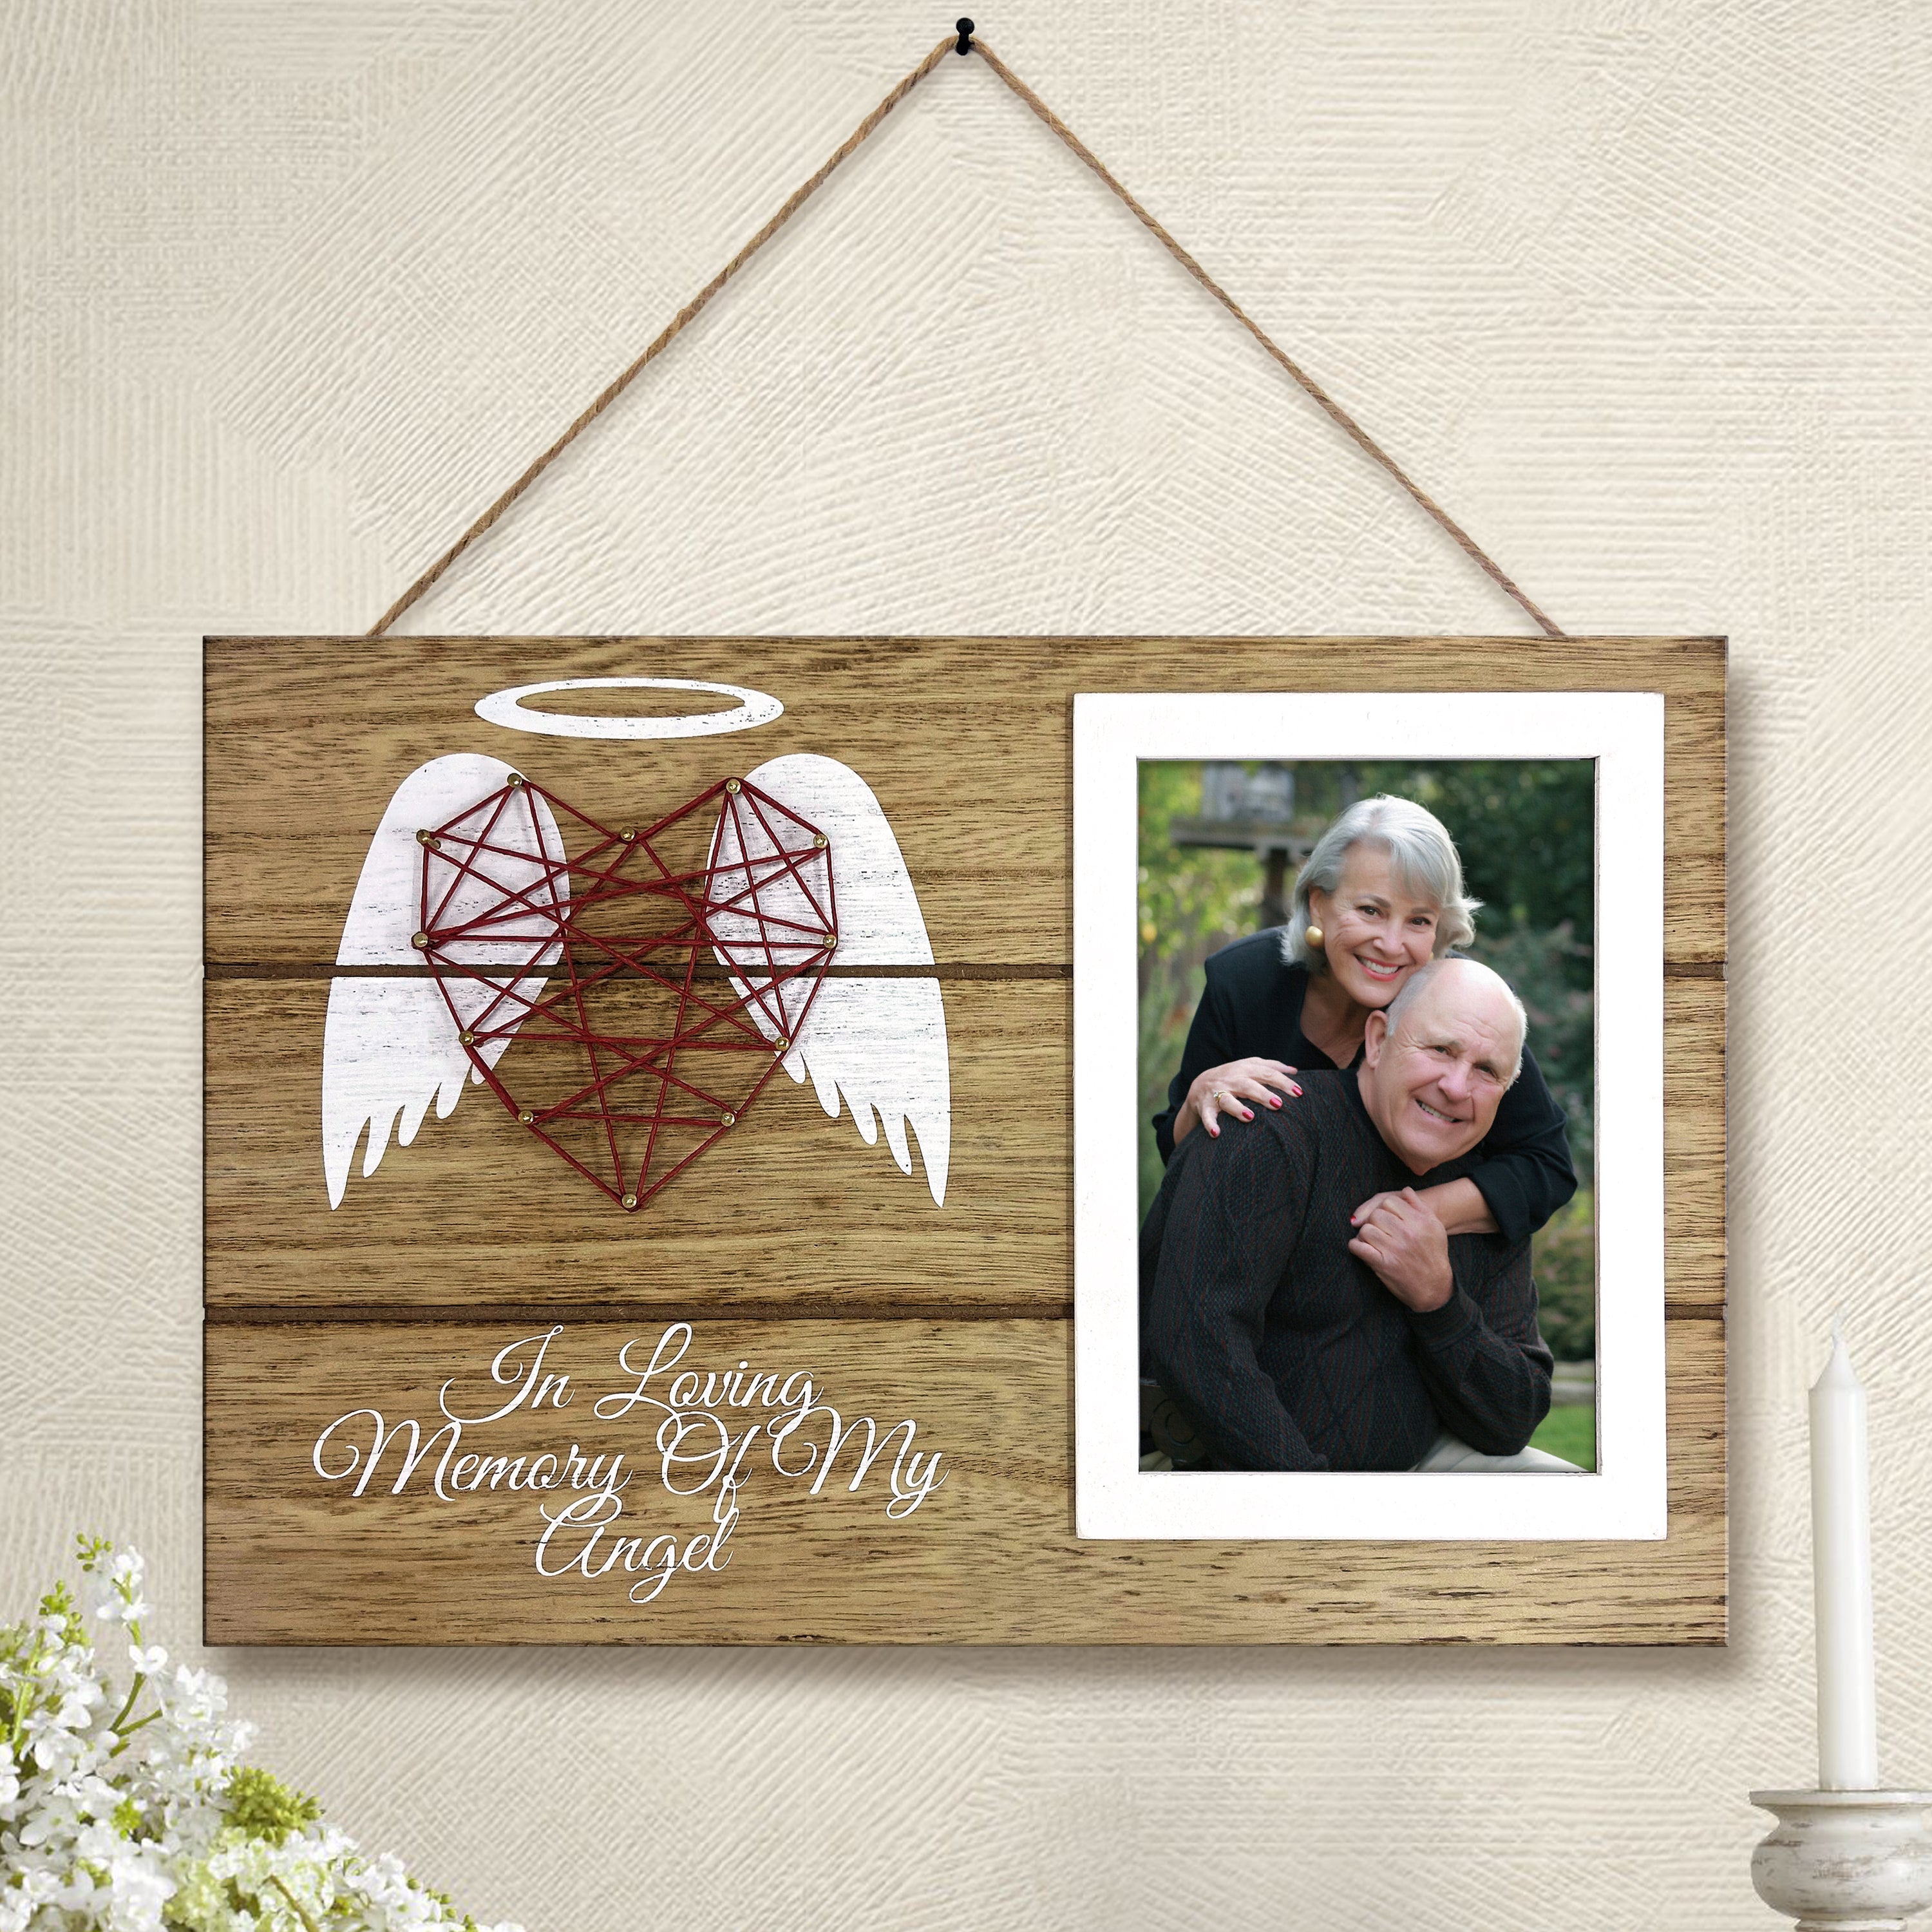 4"x6" Photo Frame in Memory of Loved One, Wood Picture Frame Sympathy Gift